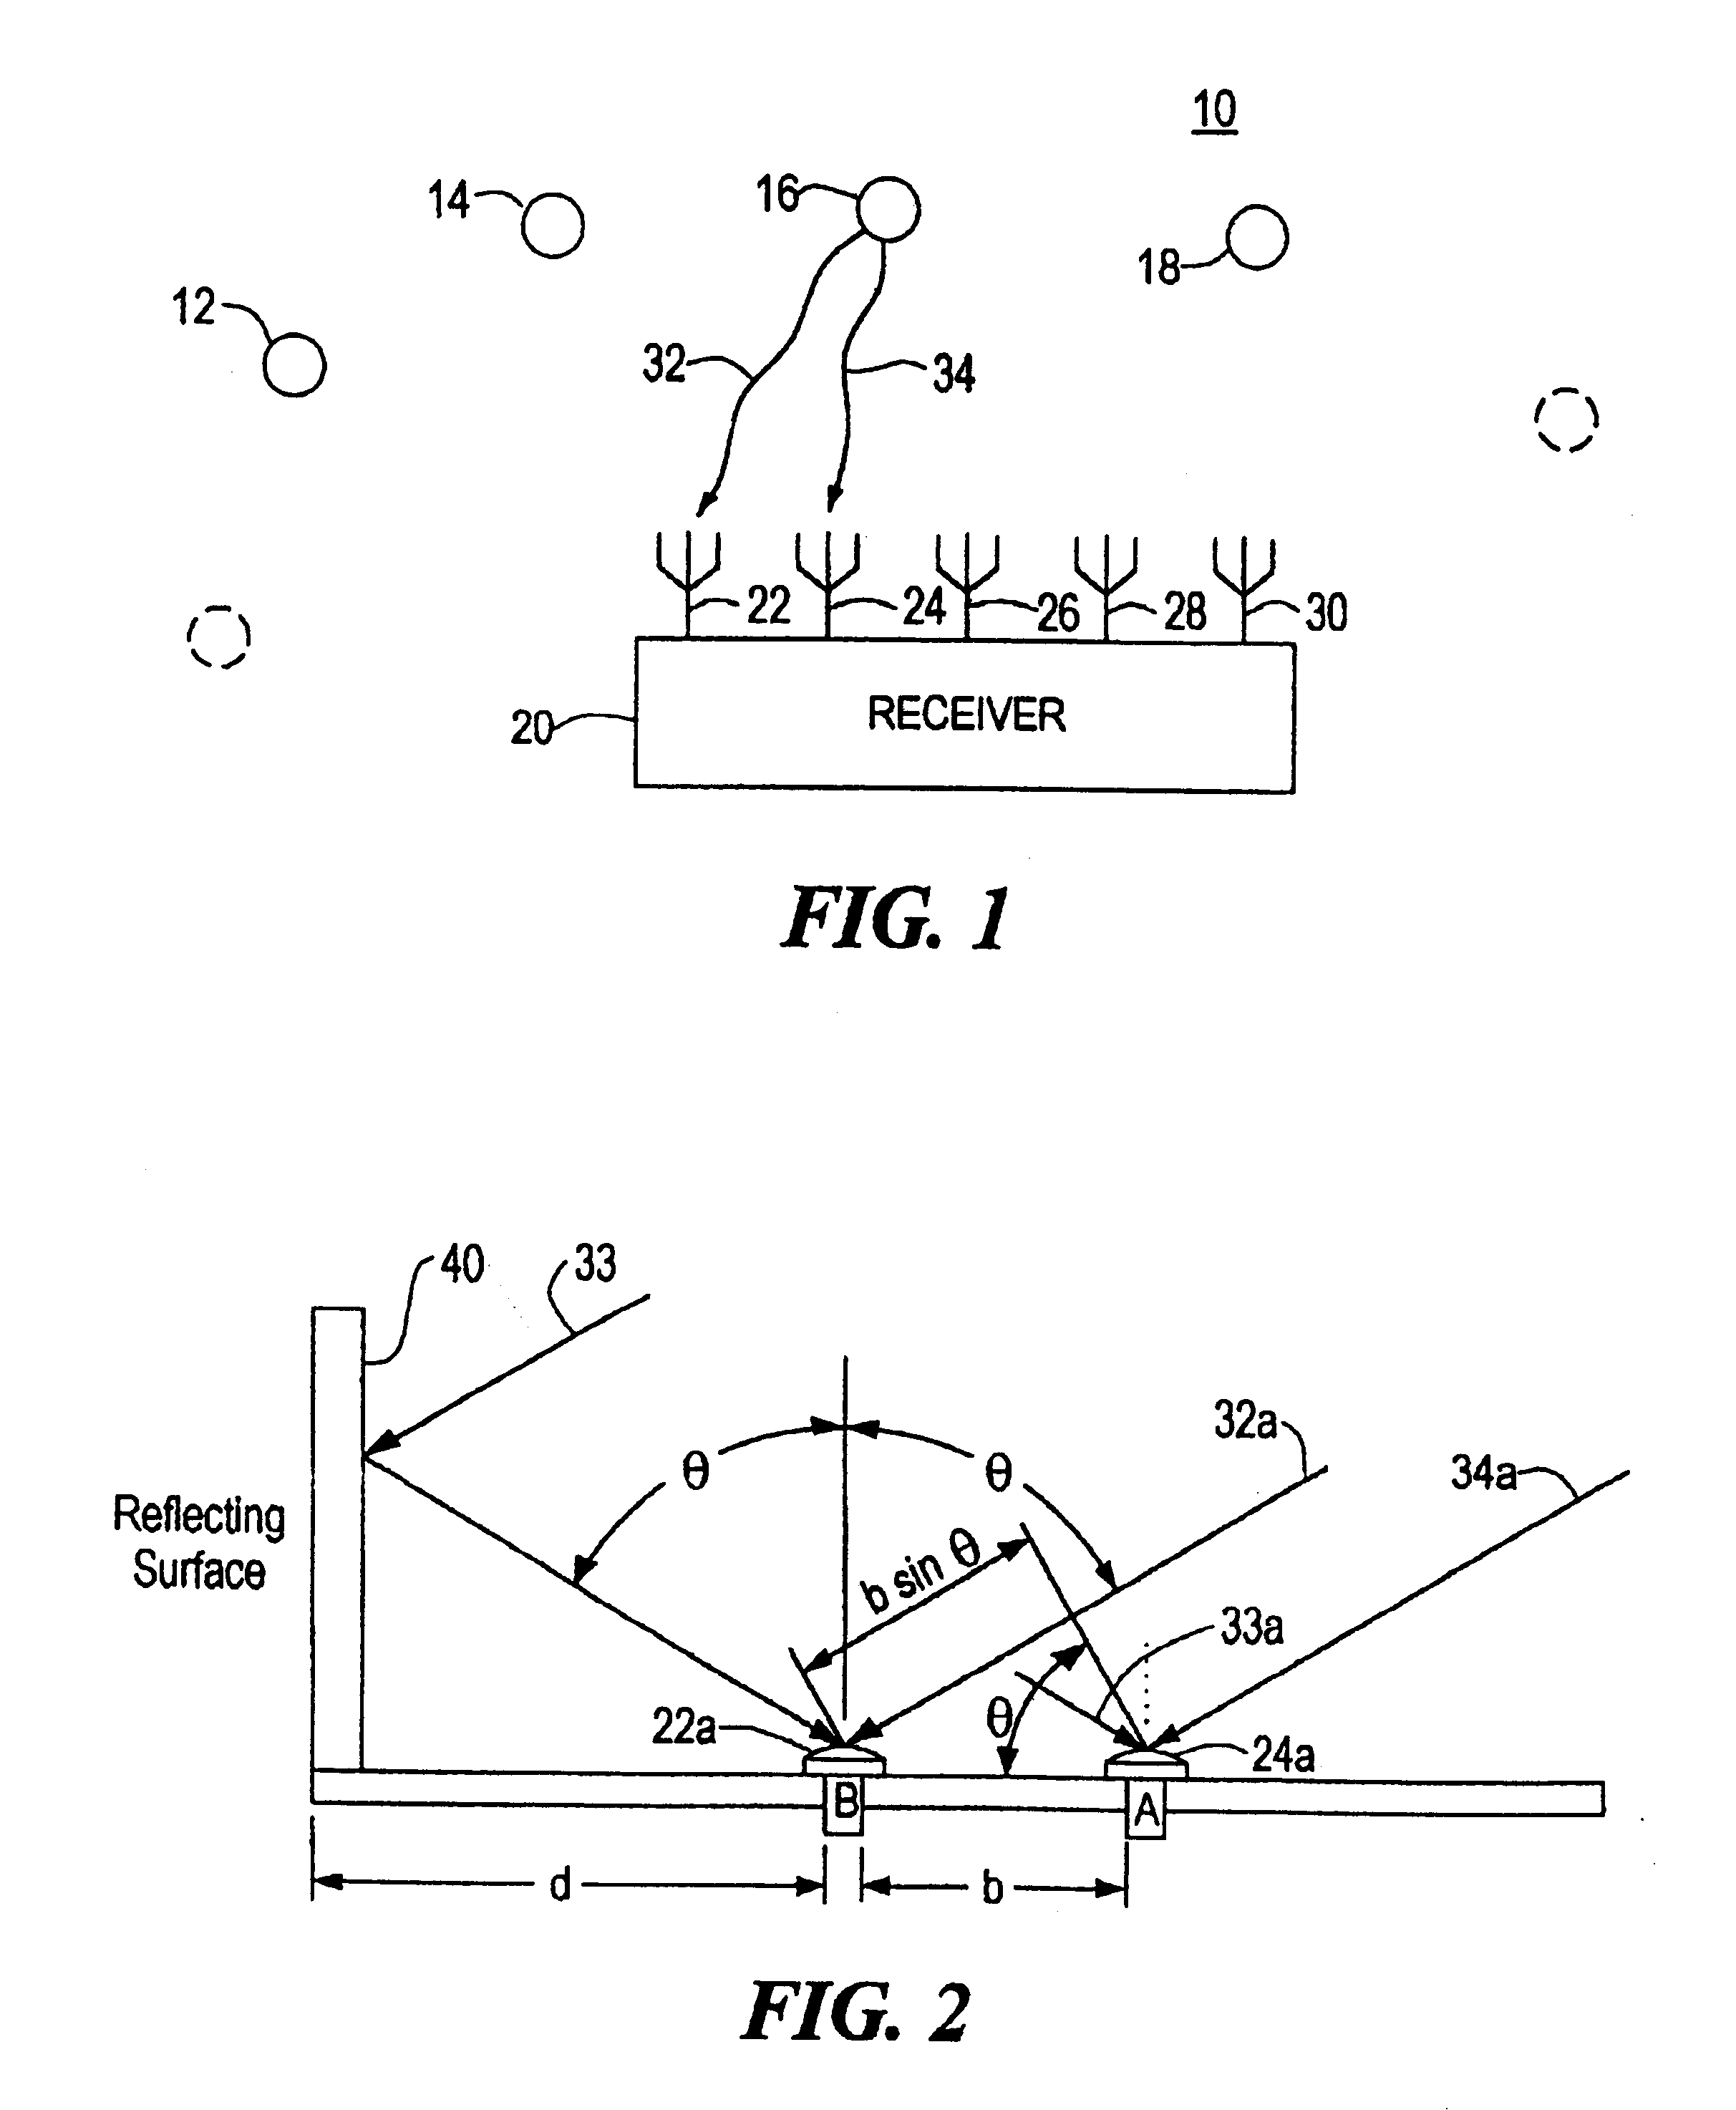 Multipath propagation detection and avoidance method and system